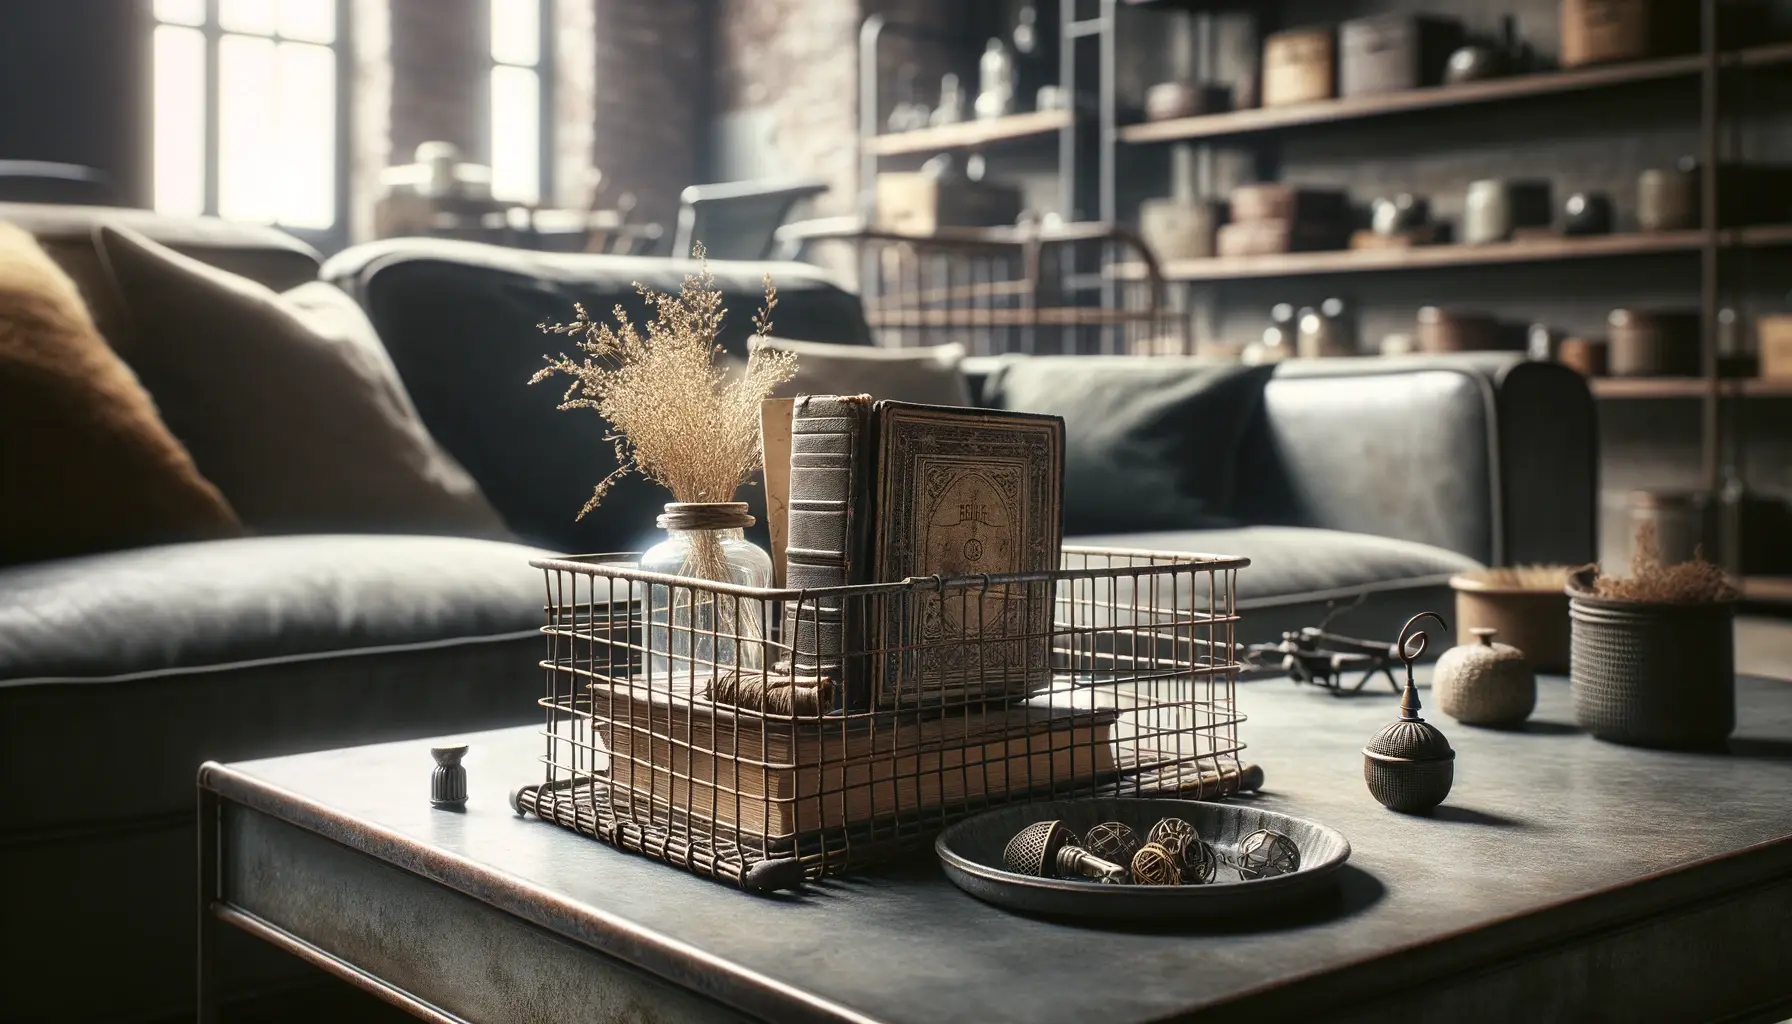 a wire basket styled with personal belonging such as vintage books can add charm and personality to an industrial style interior such as this living room coffee table.